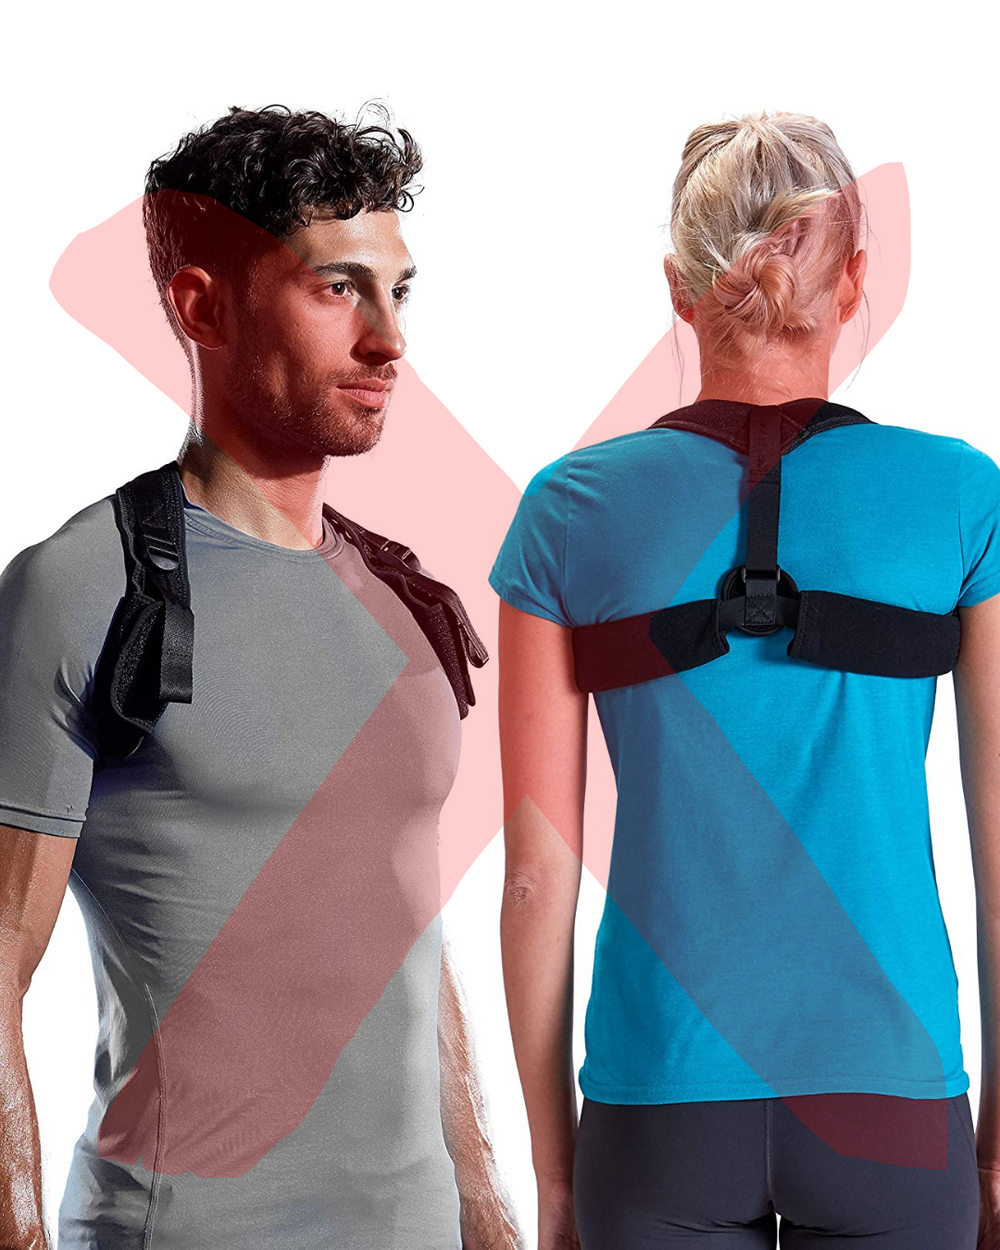 You Should Avoid Posture Braces: The Harmful Effects on Your Healt